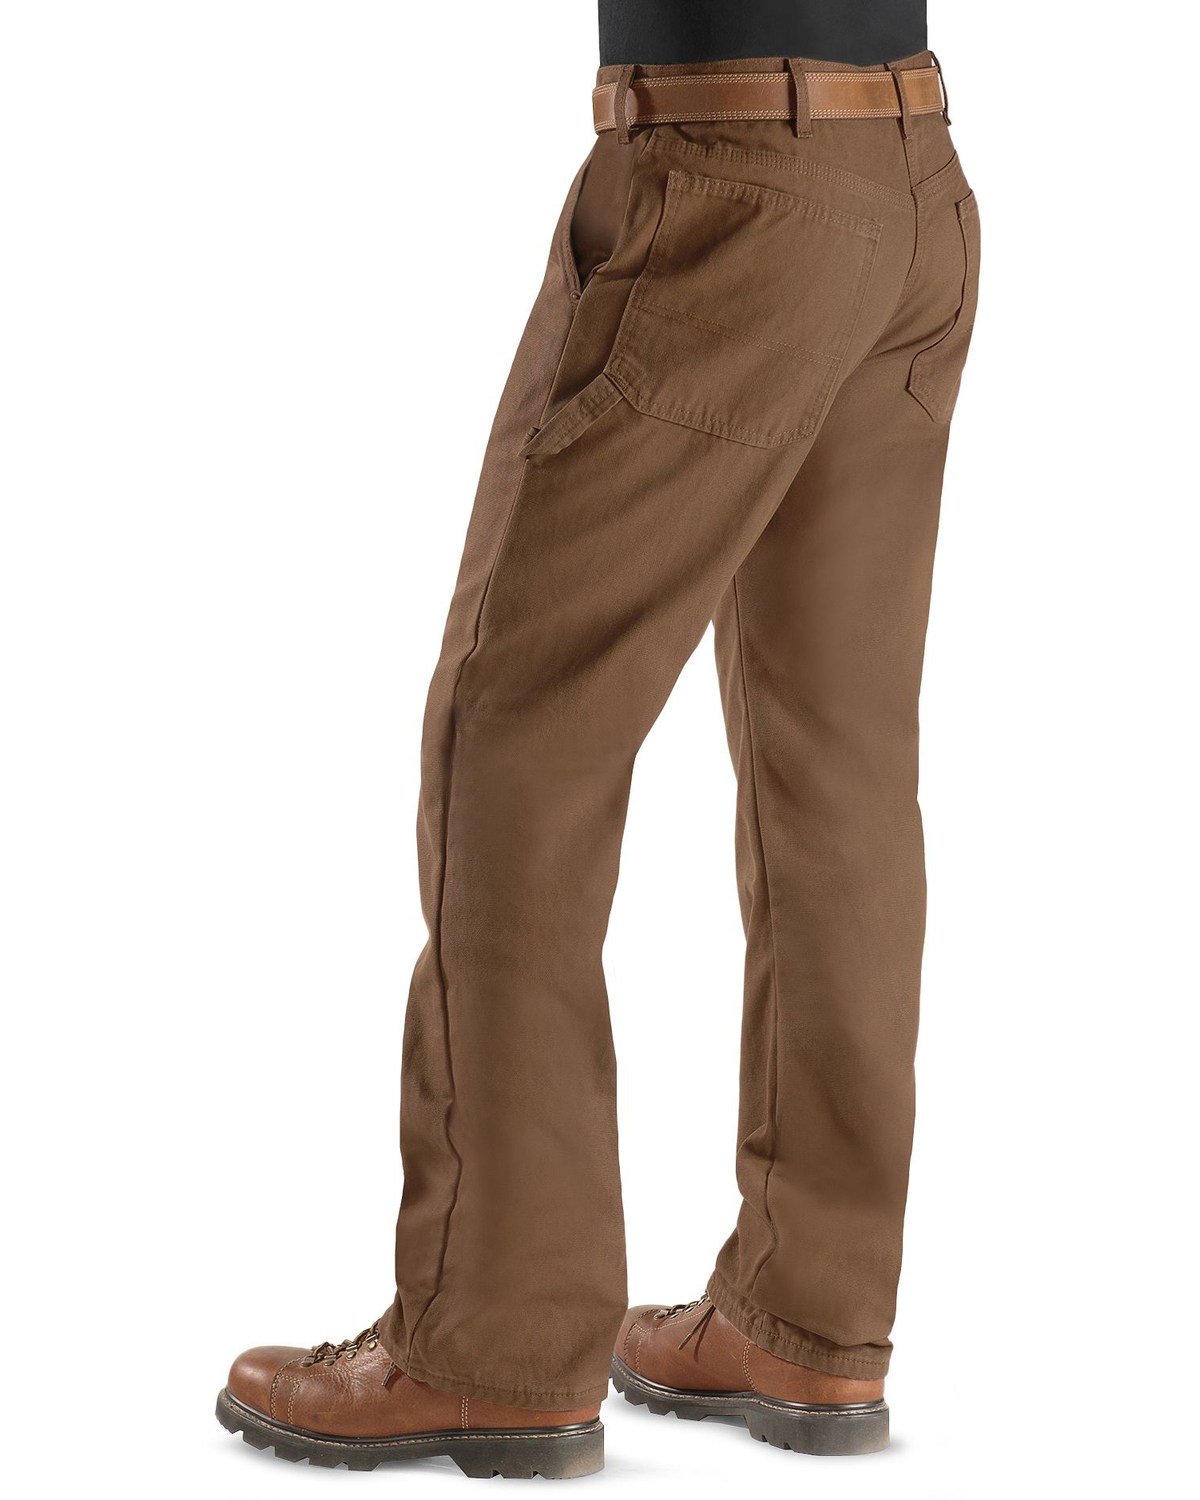 insulated carpenter pants